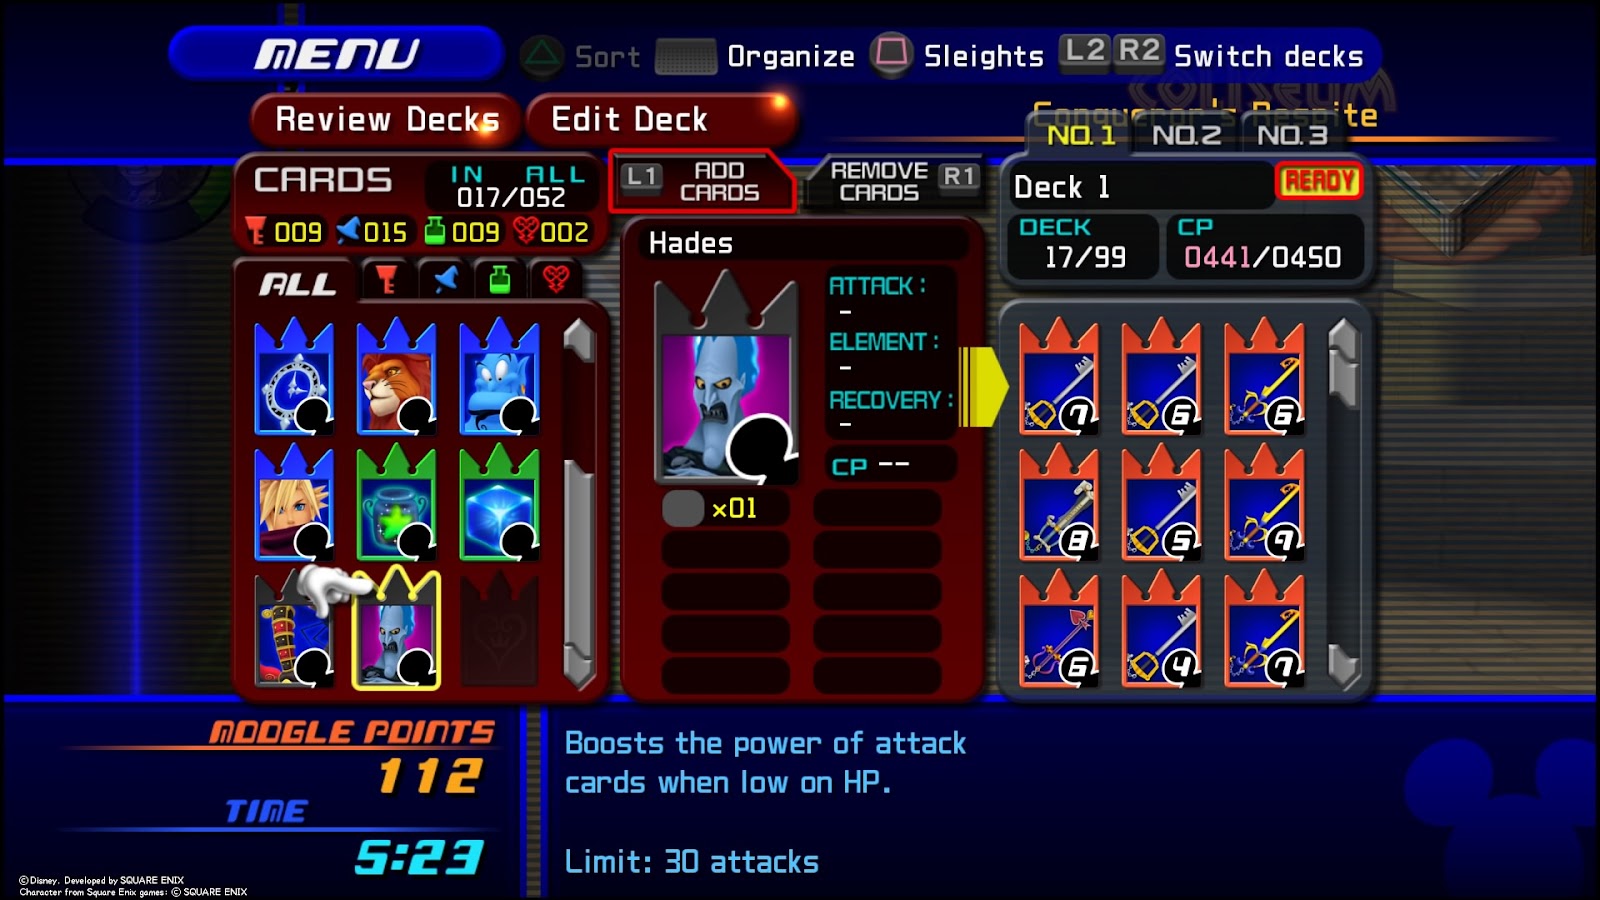 Not a bad boss card, but not as useful as something like Jafar (2) | Kingdom Hearts Re:Chain of Memories